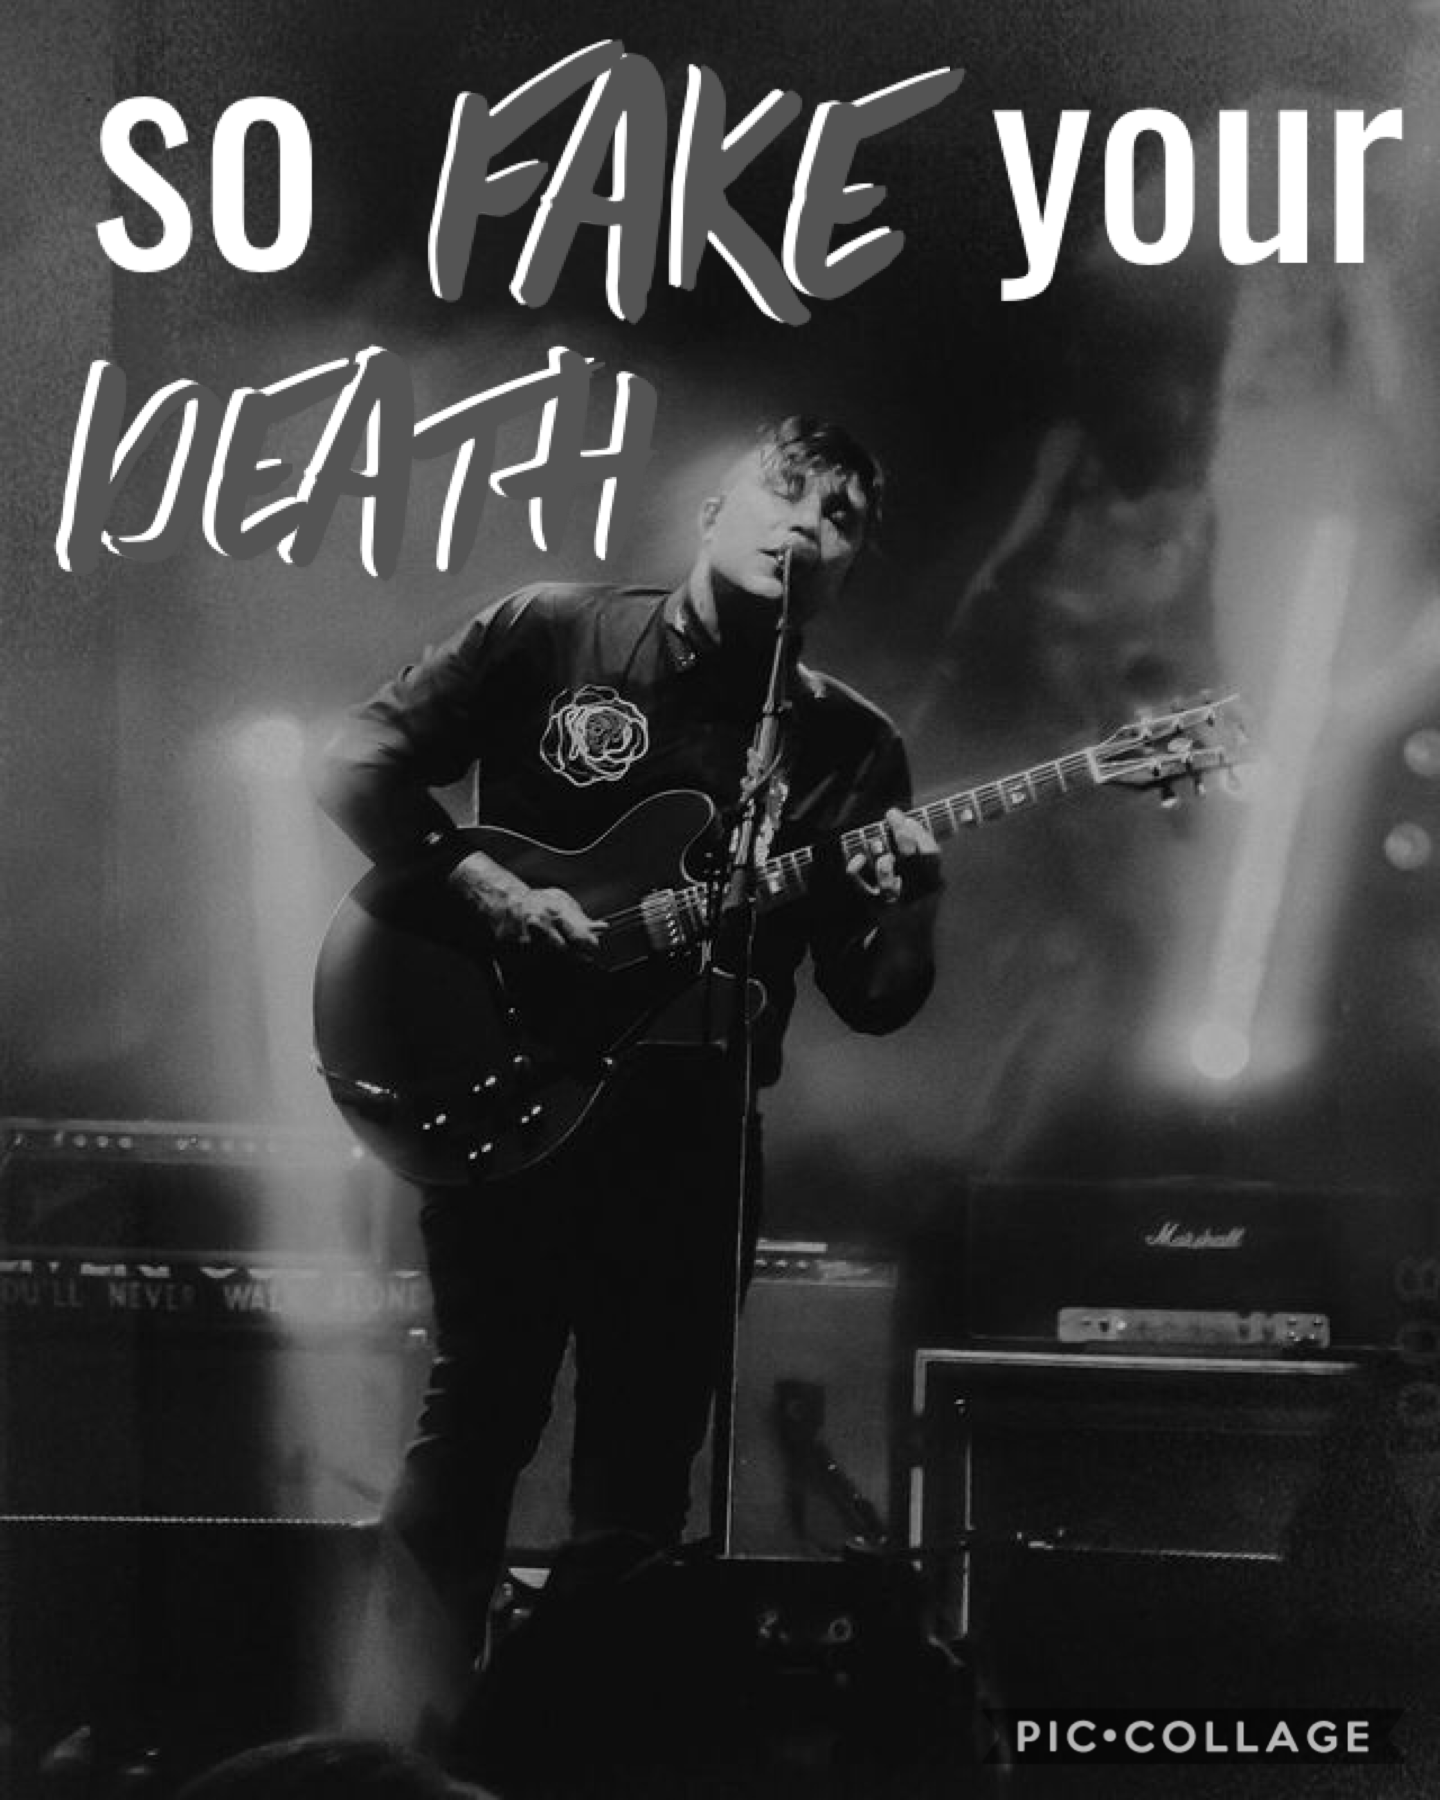 fake your death•my chemical romance

Merry Christmas!!
25•12•19